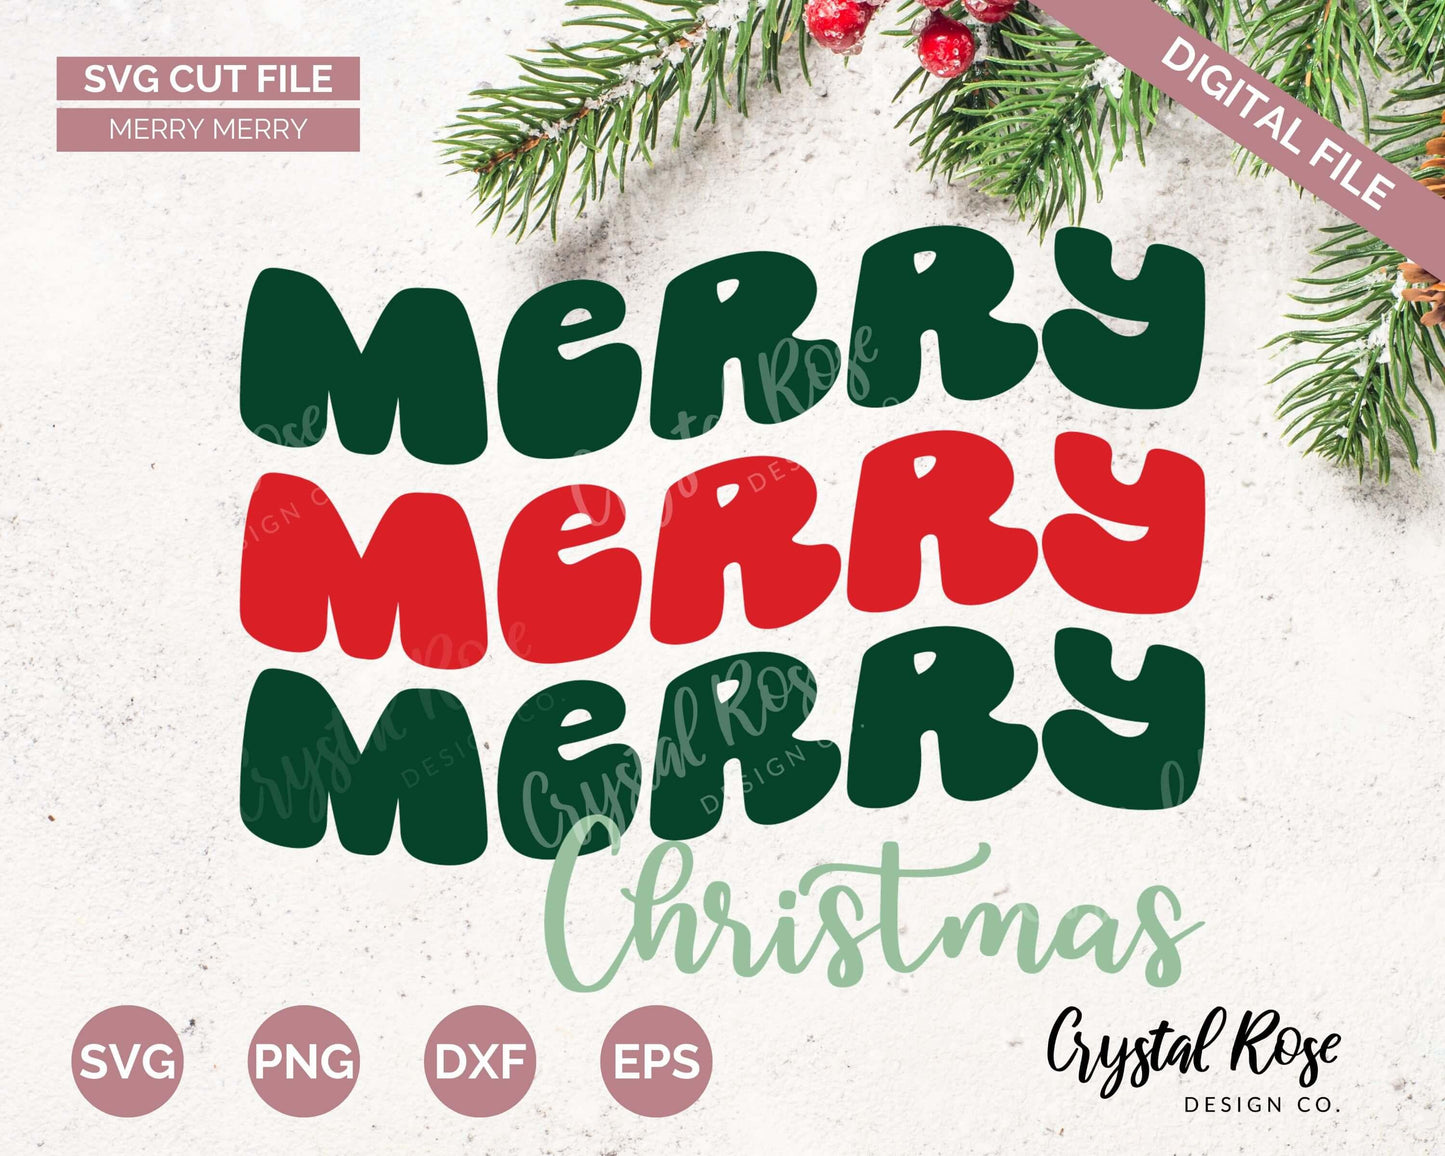 Retro Merry Christmas SVG, Christmas SVG, Digital Download, Cricut, Silhouette, Glowforge (includes svg/png/dxf/eps) - Crystal Rose Design Co.